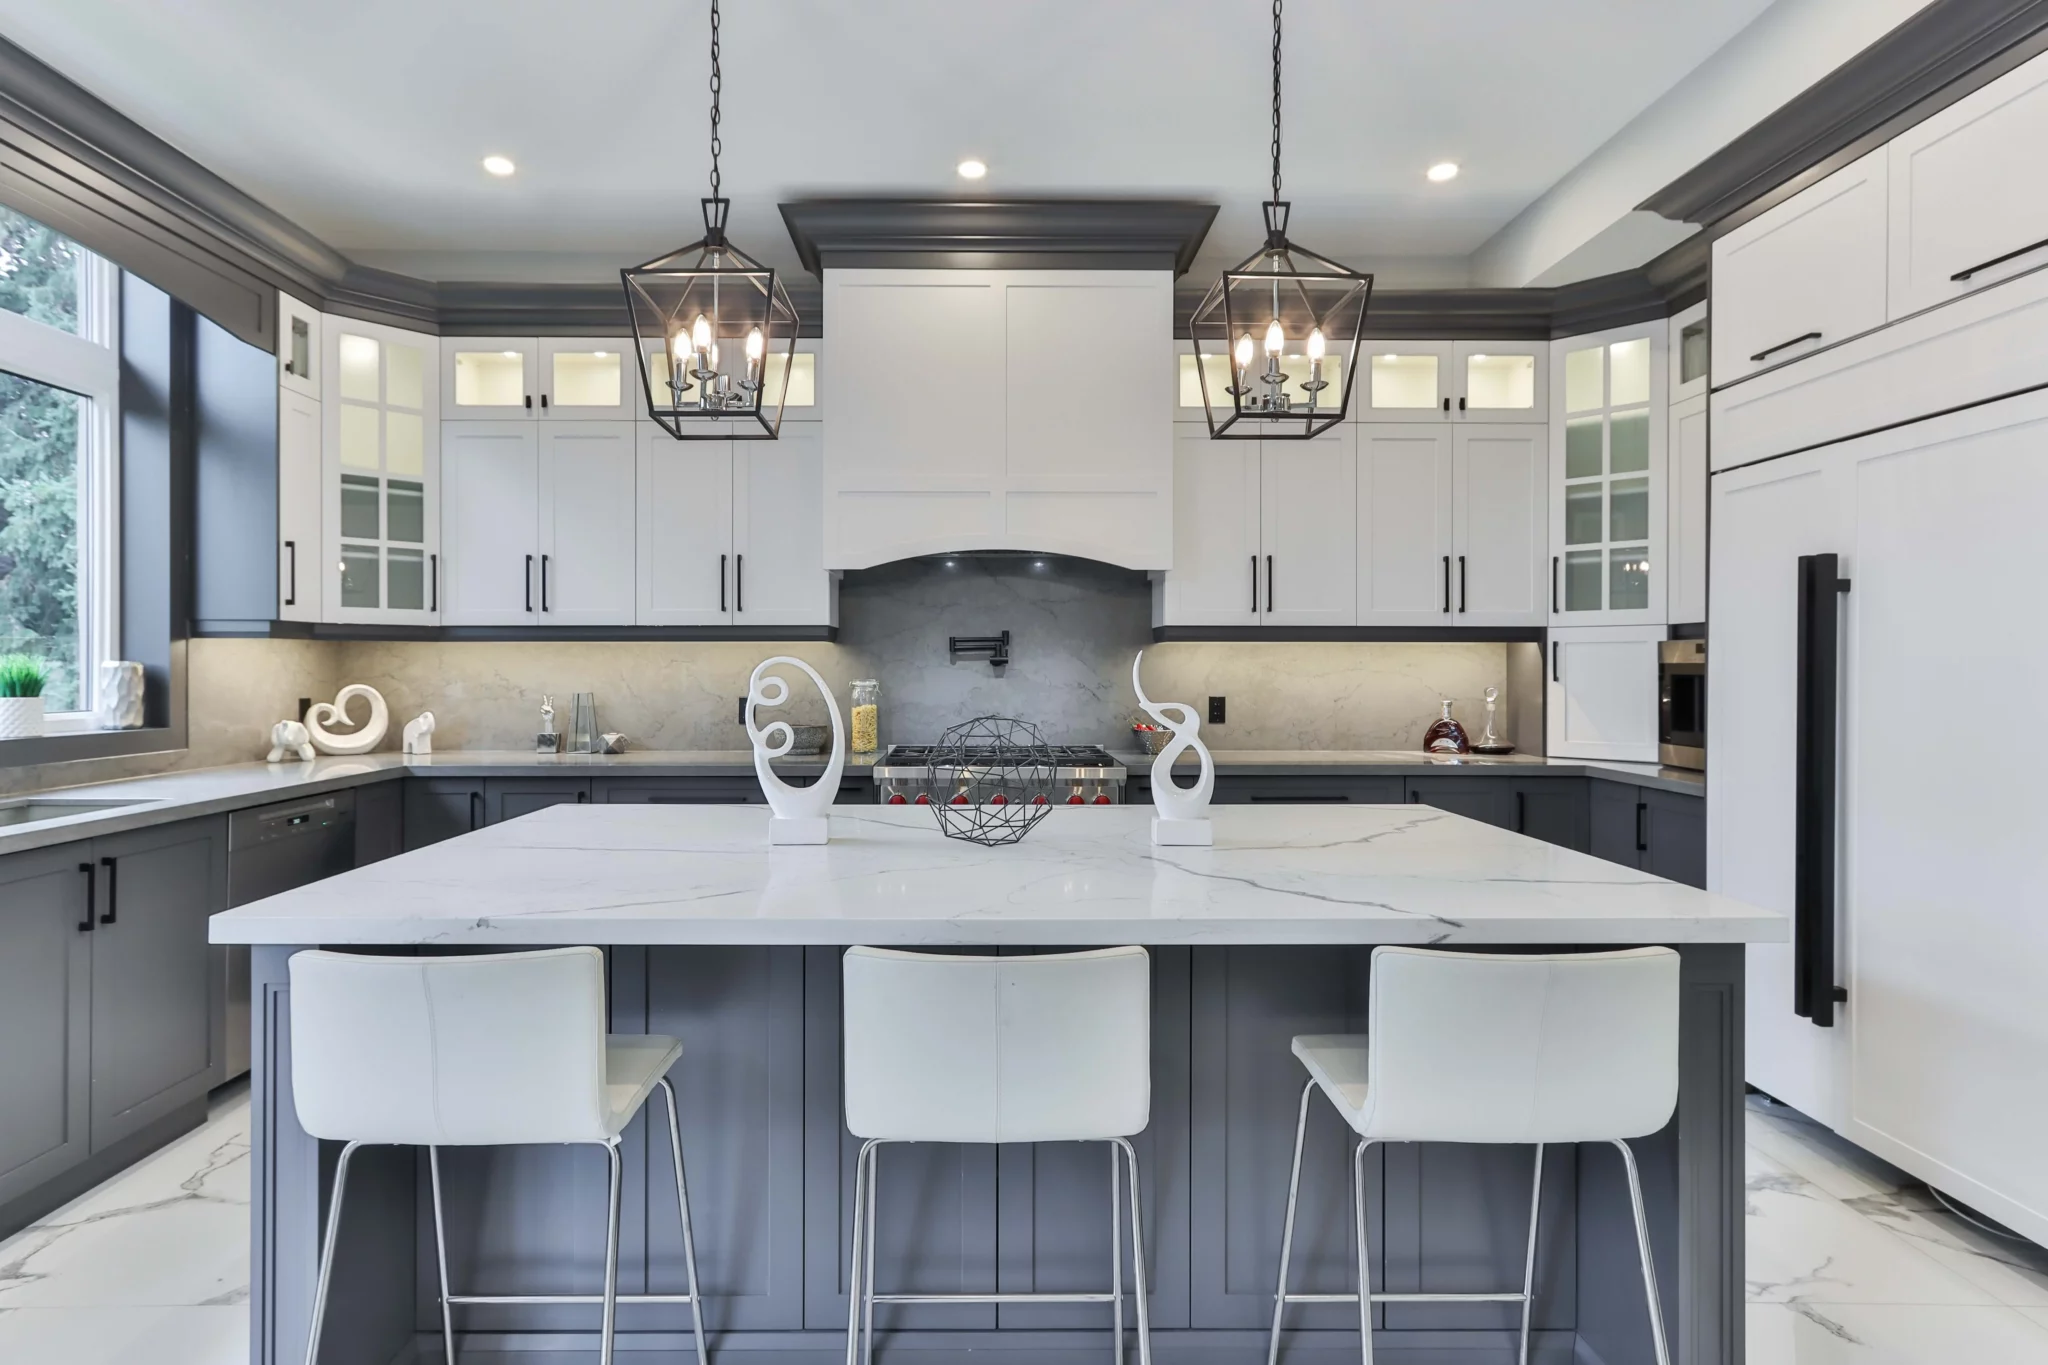 How to Budget for Your Kitchen Renovation: Breaking Down Home Remodeling Costs